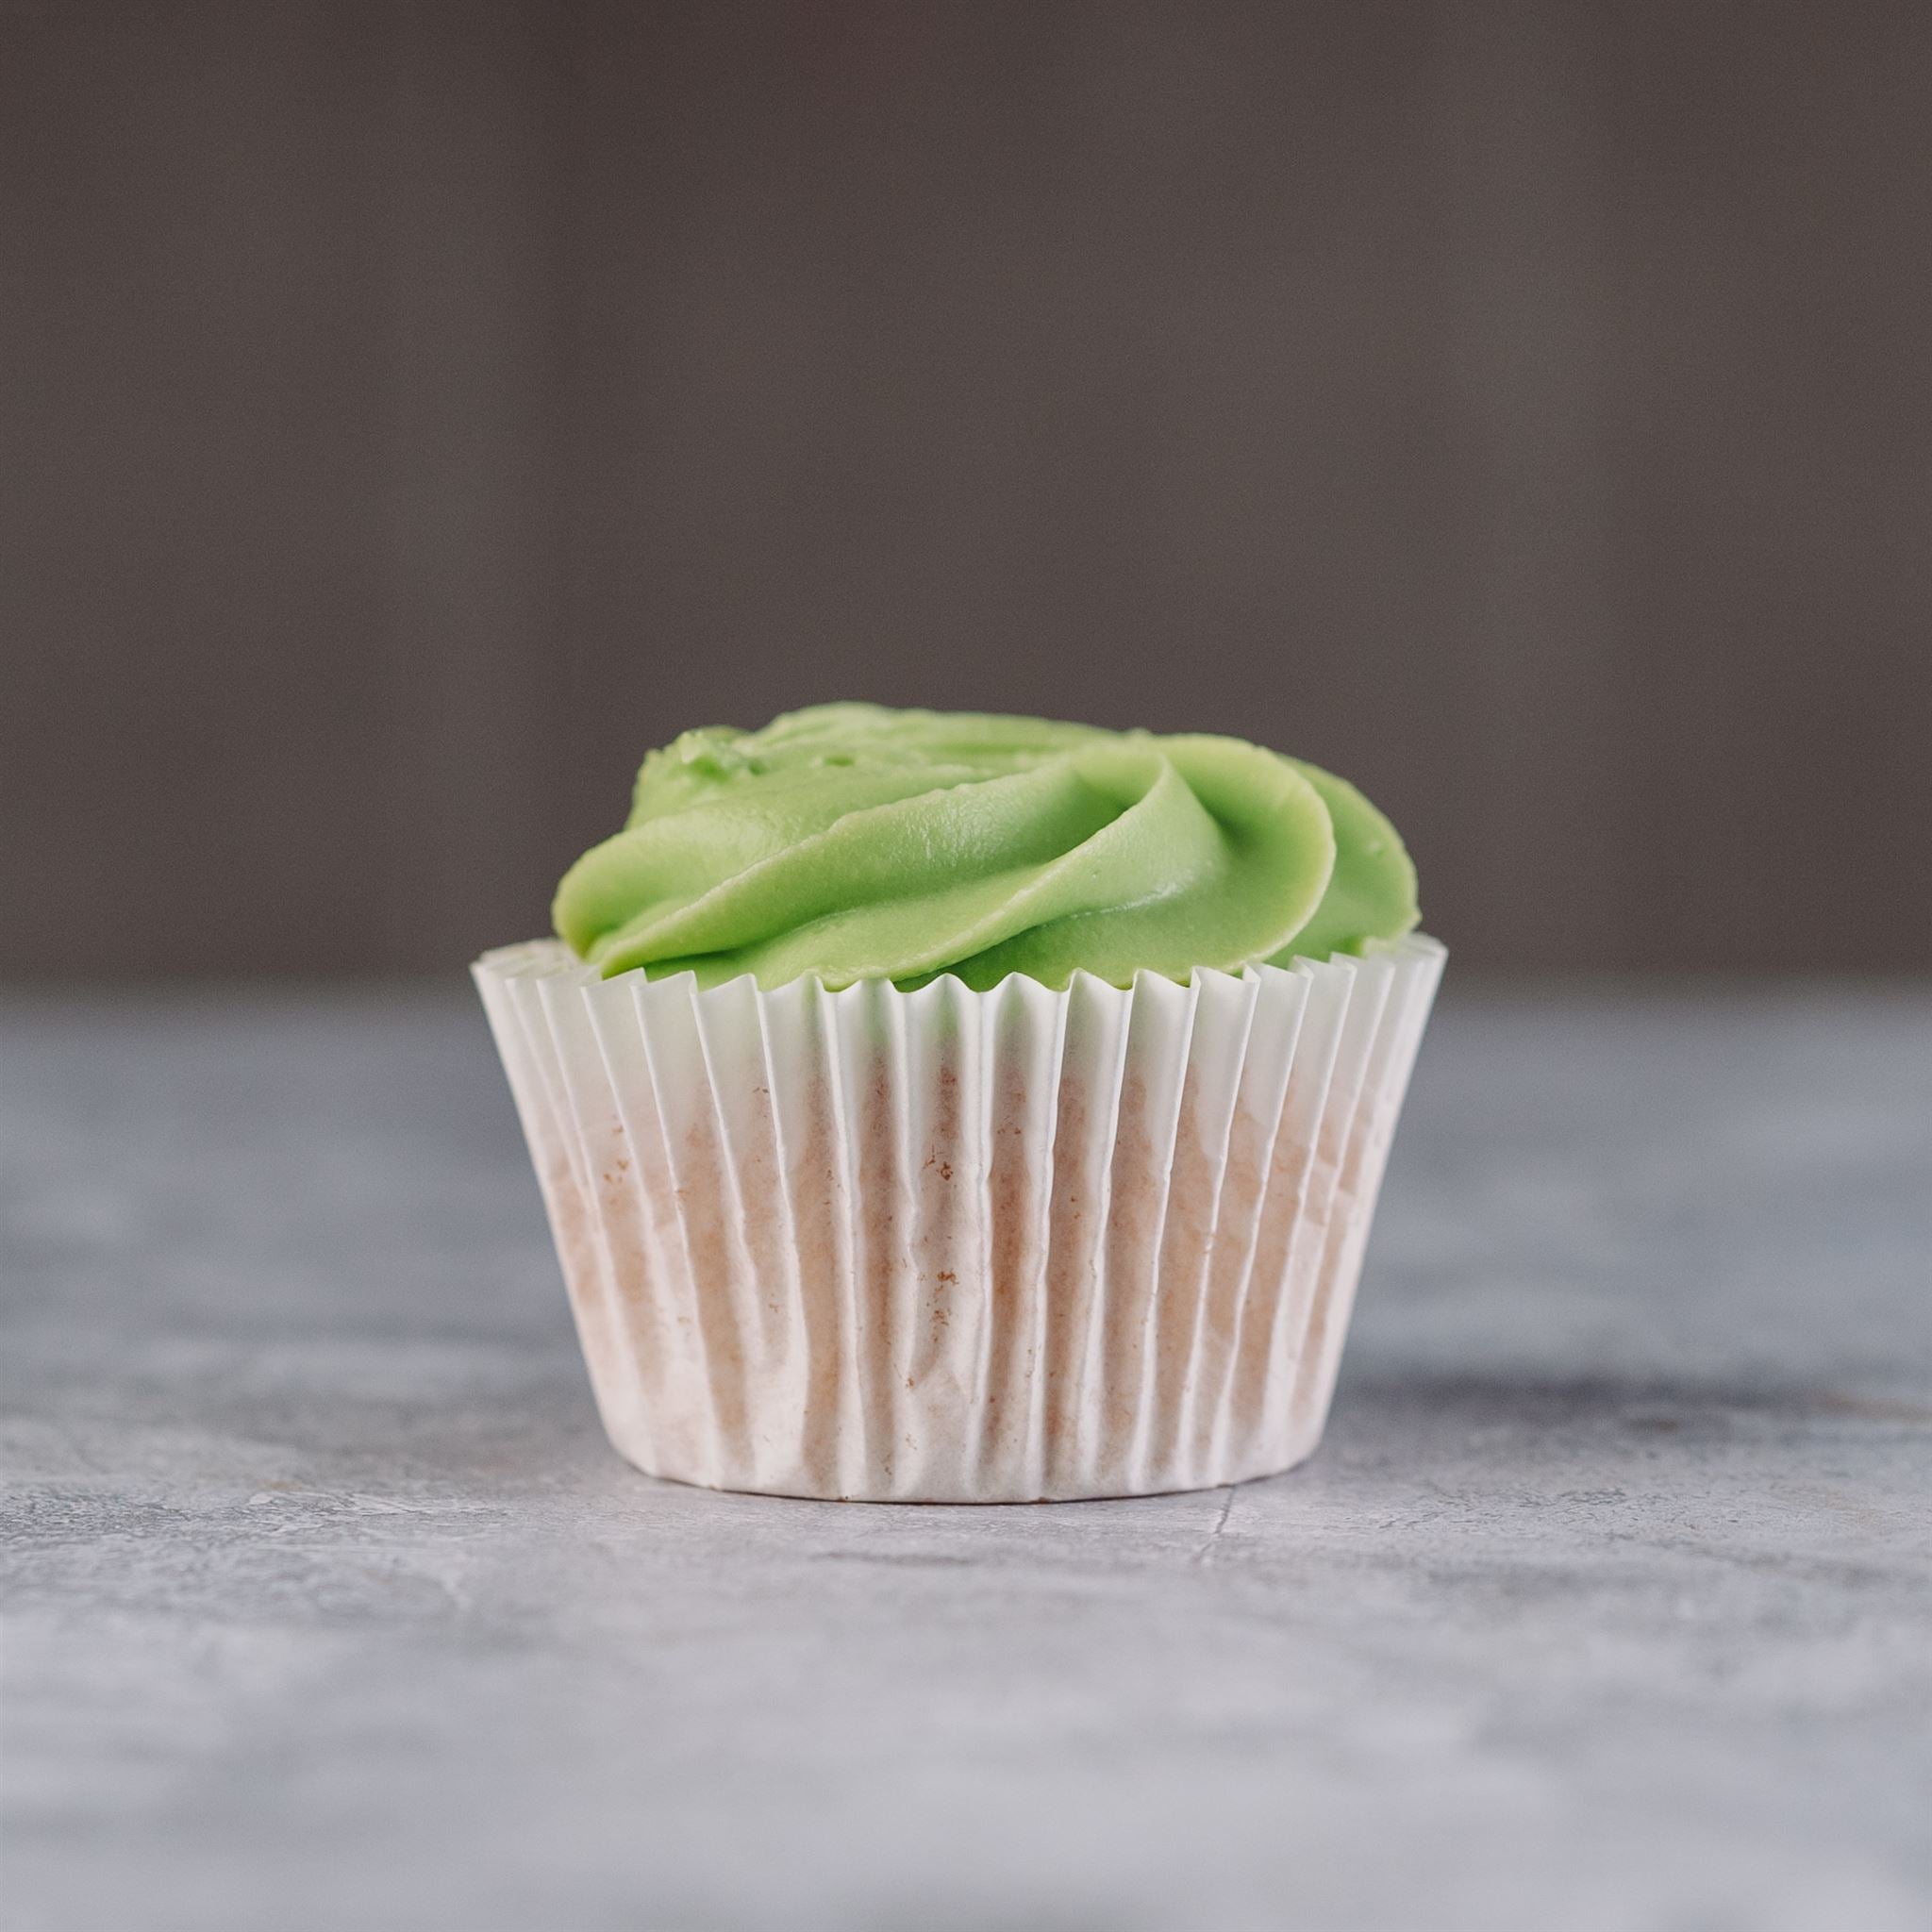 Green Frosting Vanilla Cupcakes - Jack and Beyond